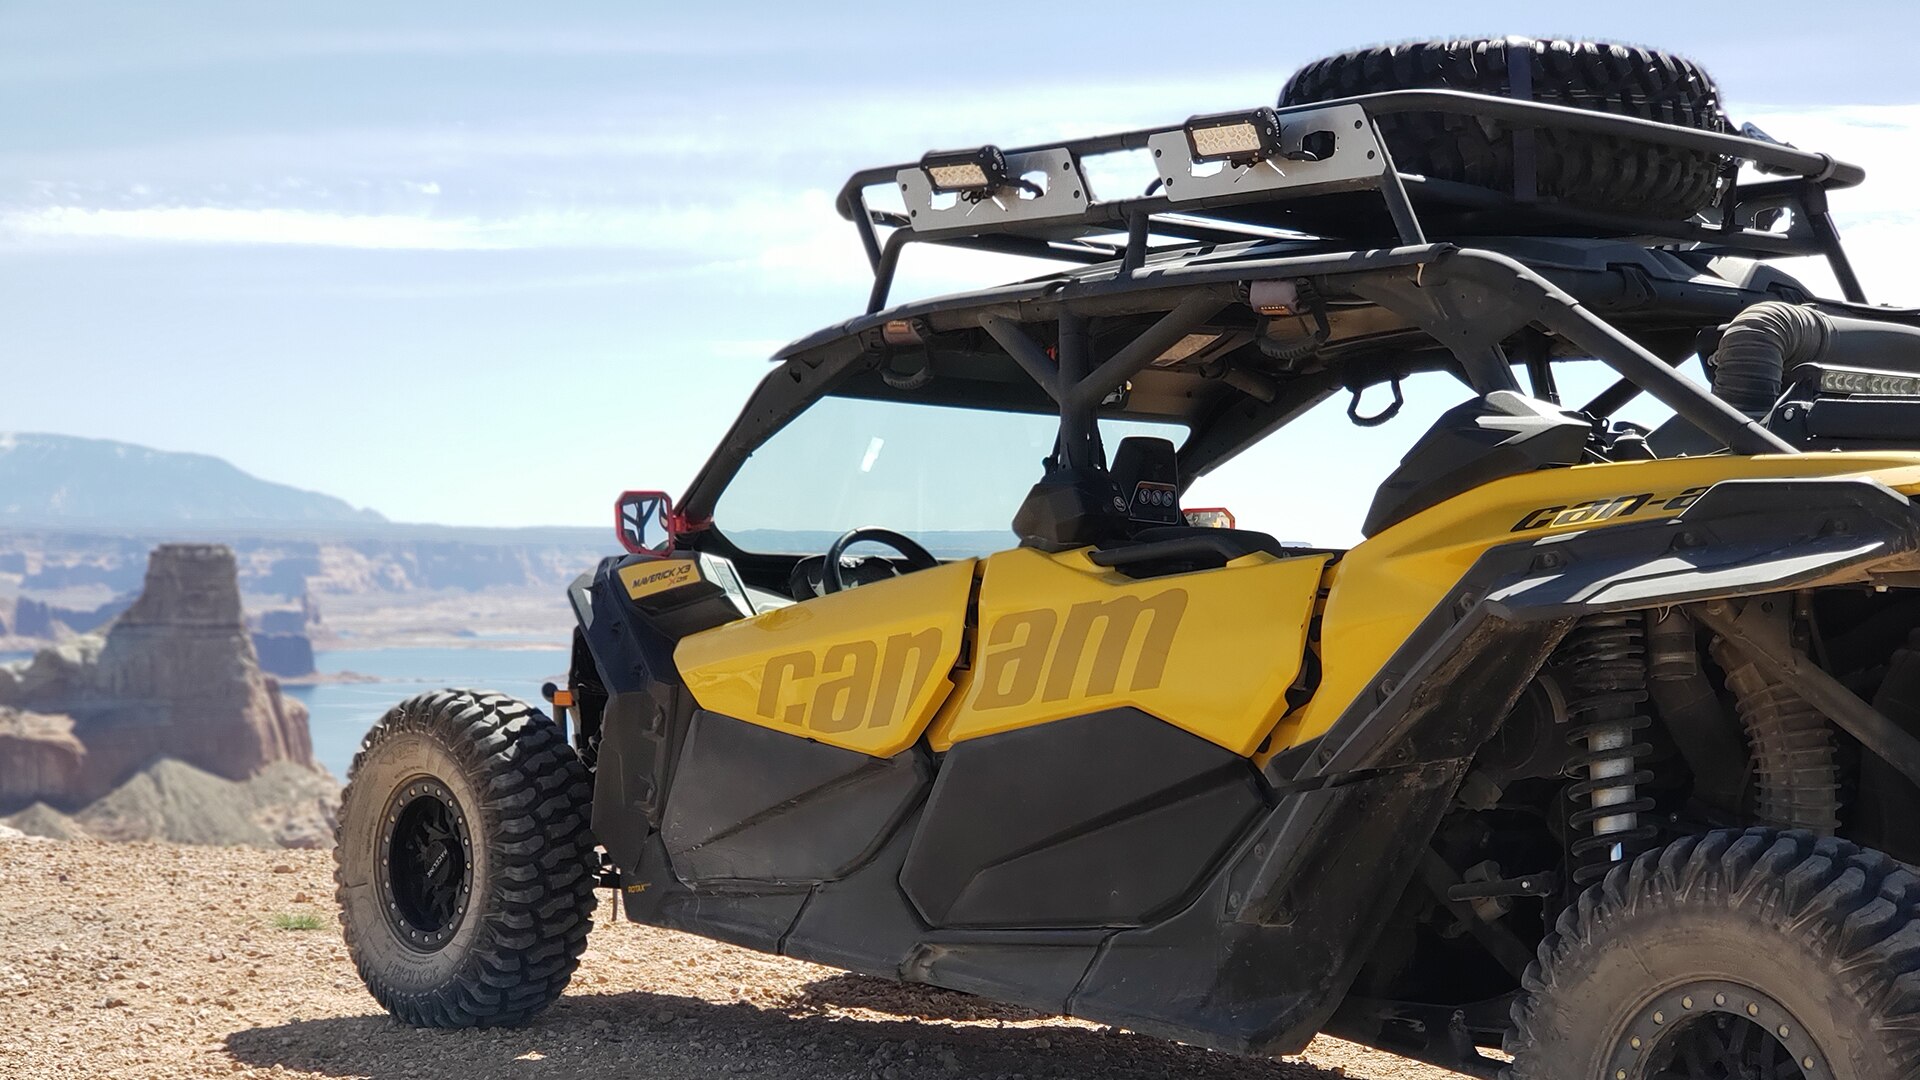 A Can-Am SxS at Lake Powell